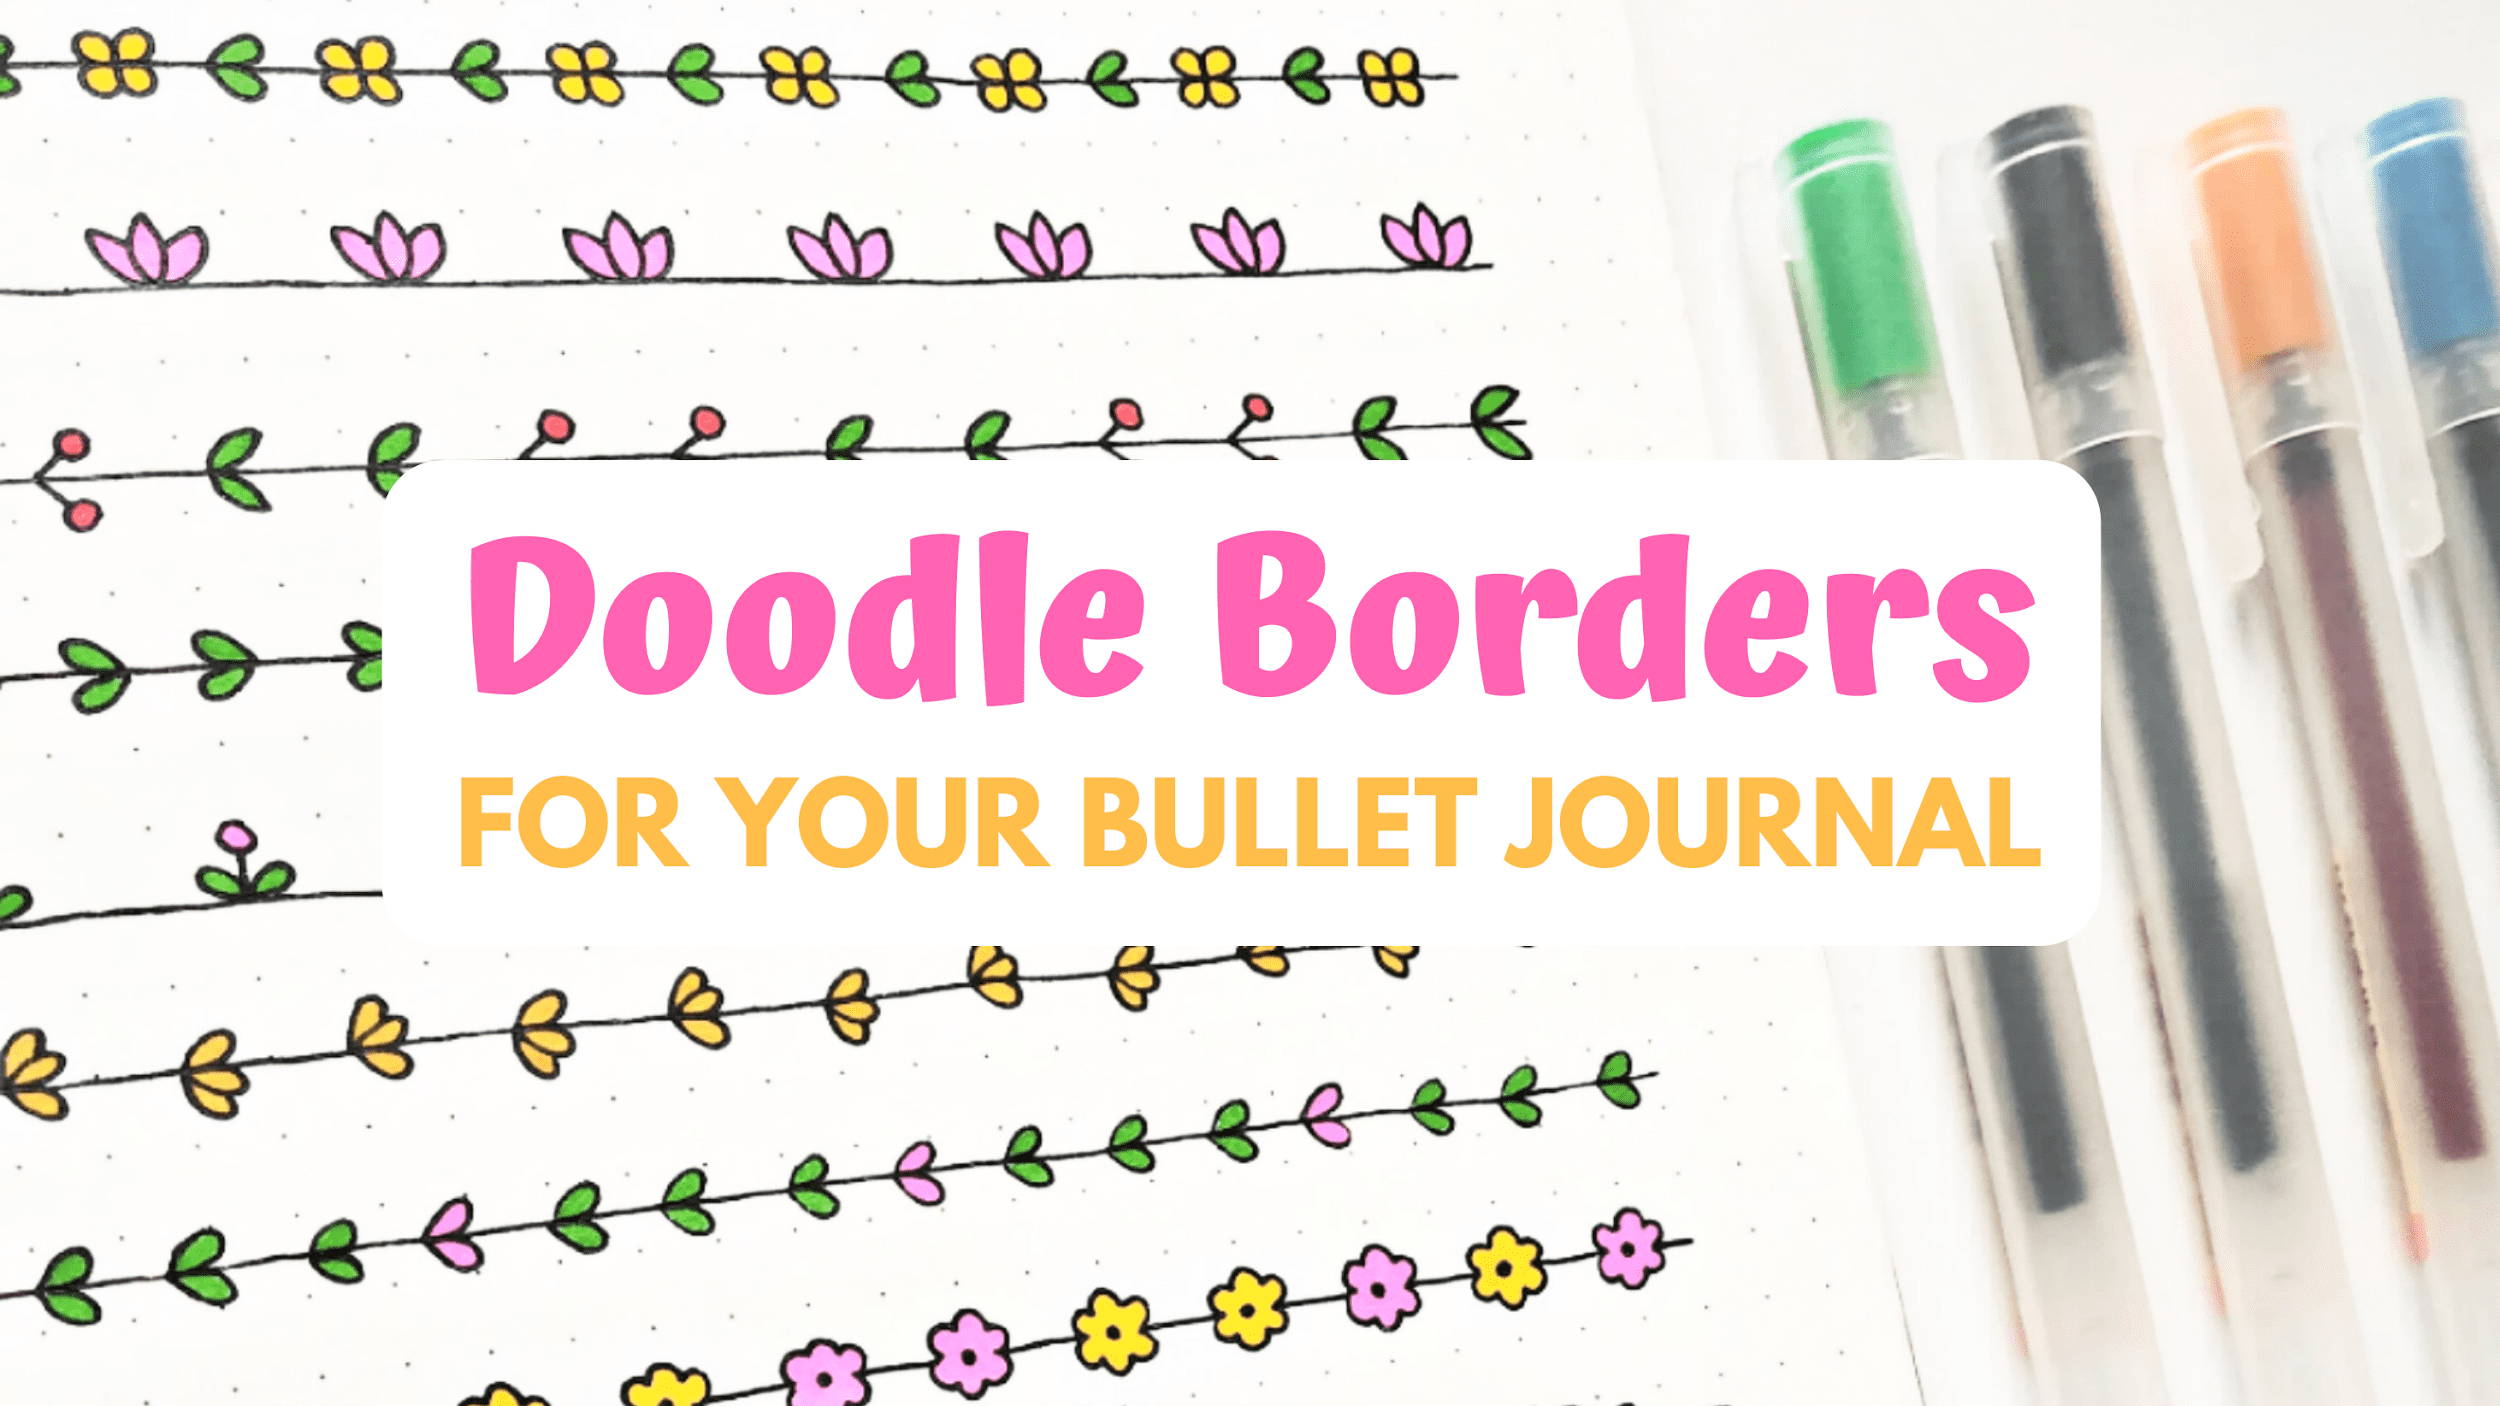 How to doodle cute borders in your bullet journal